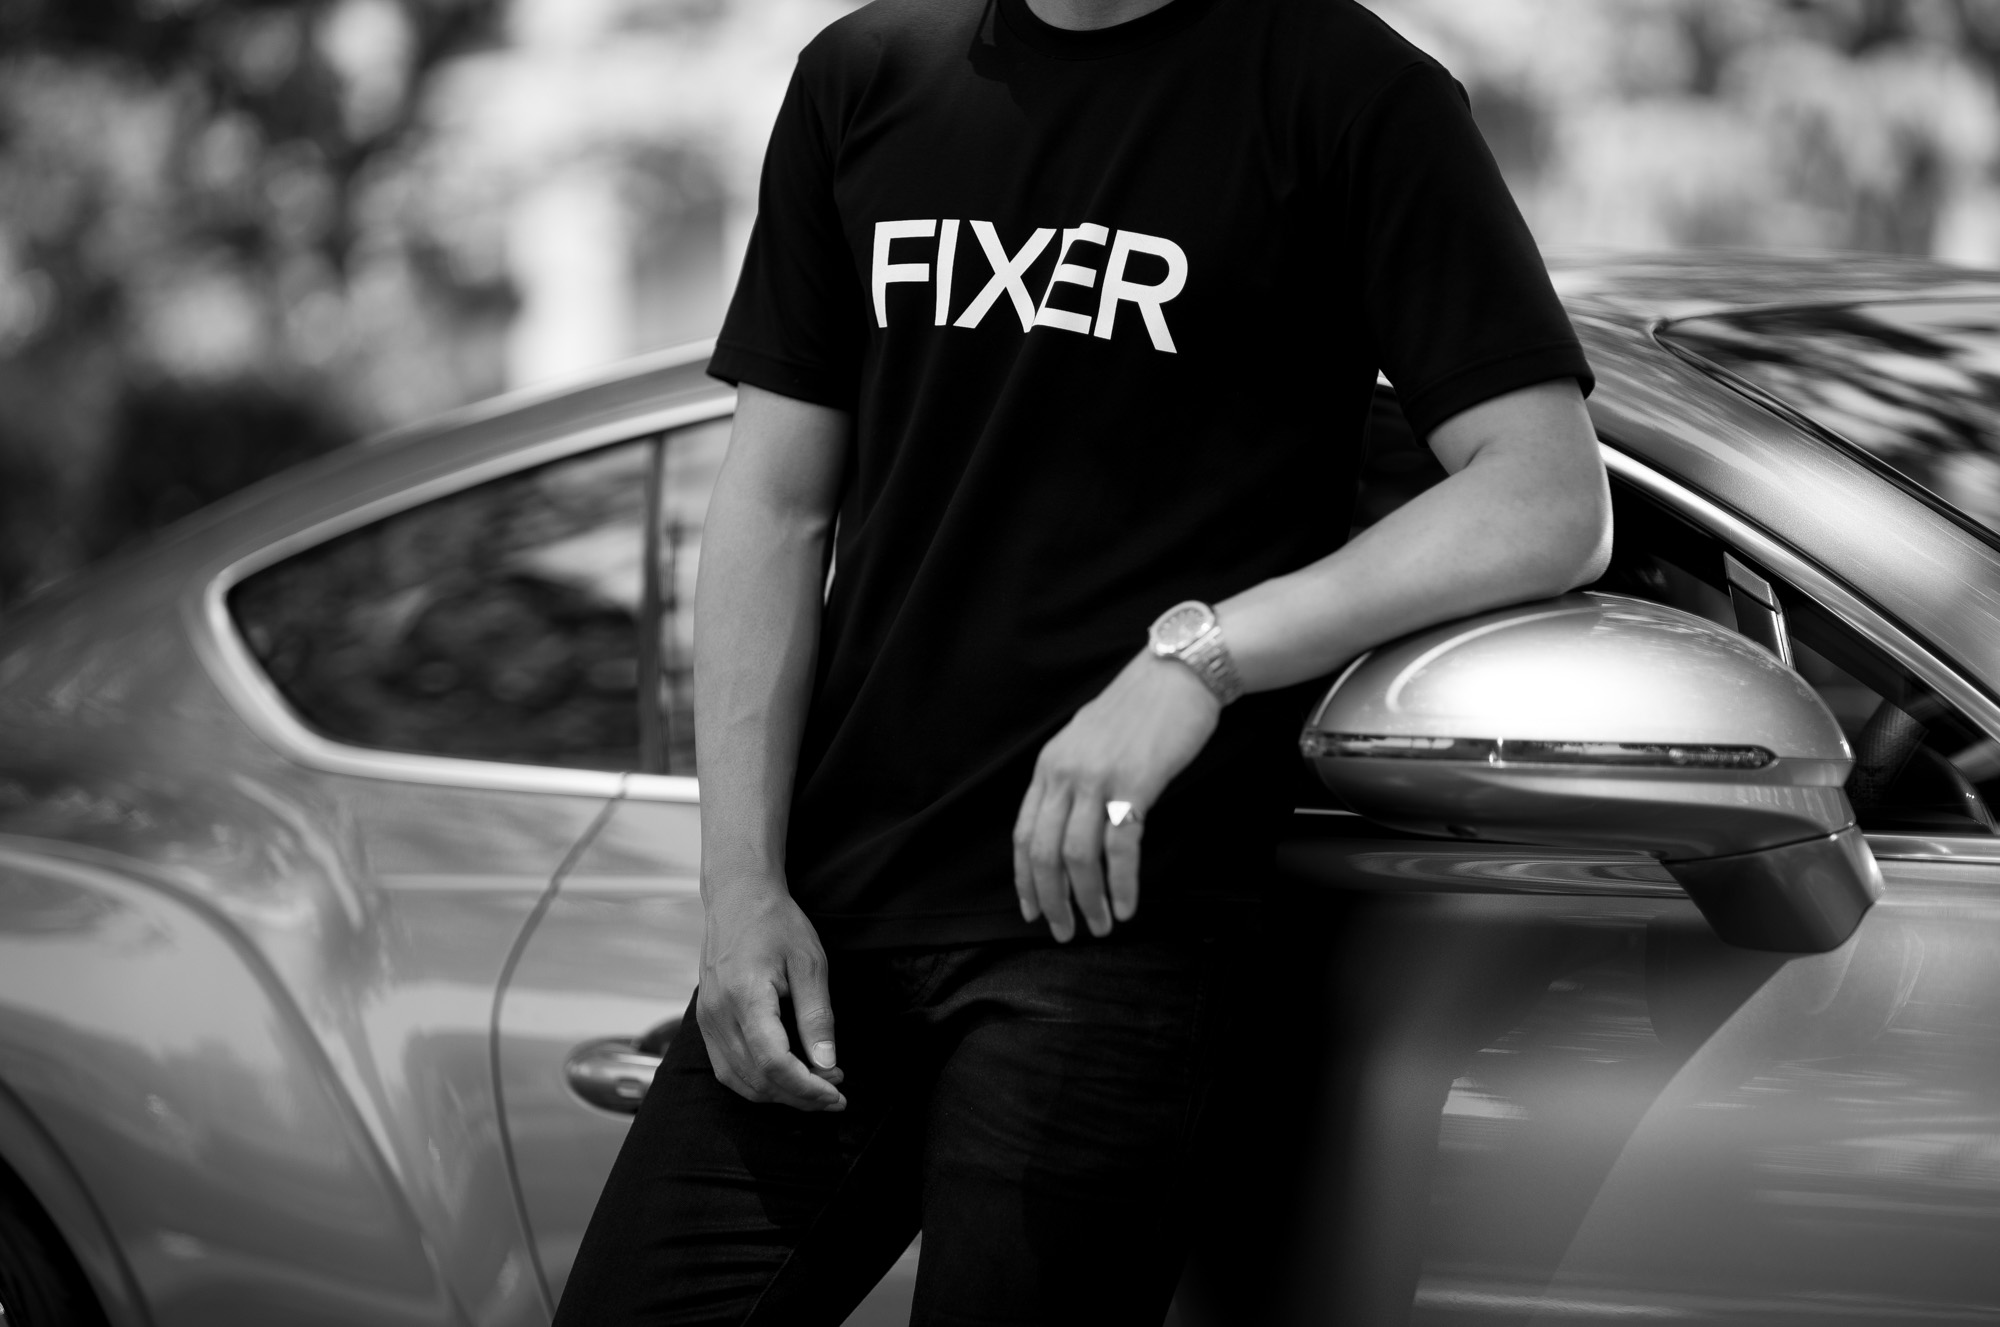 FIXER FTS-02 Print Crew Neck T-shirt BLACK 【Special Model】【東京限定】フィクサー プリントTシャツ ブラック ホワイトロゴ 愛知 名古屋 Alto e Diritto altoediritto アルトエデリット 東京限定